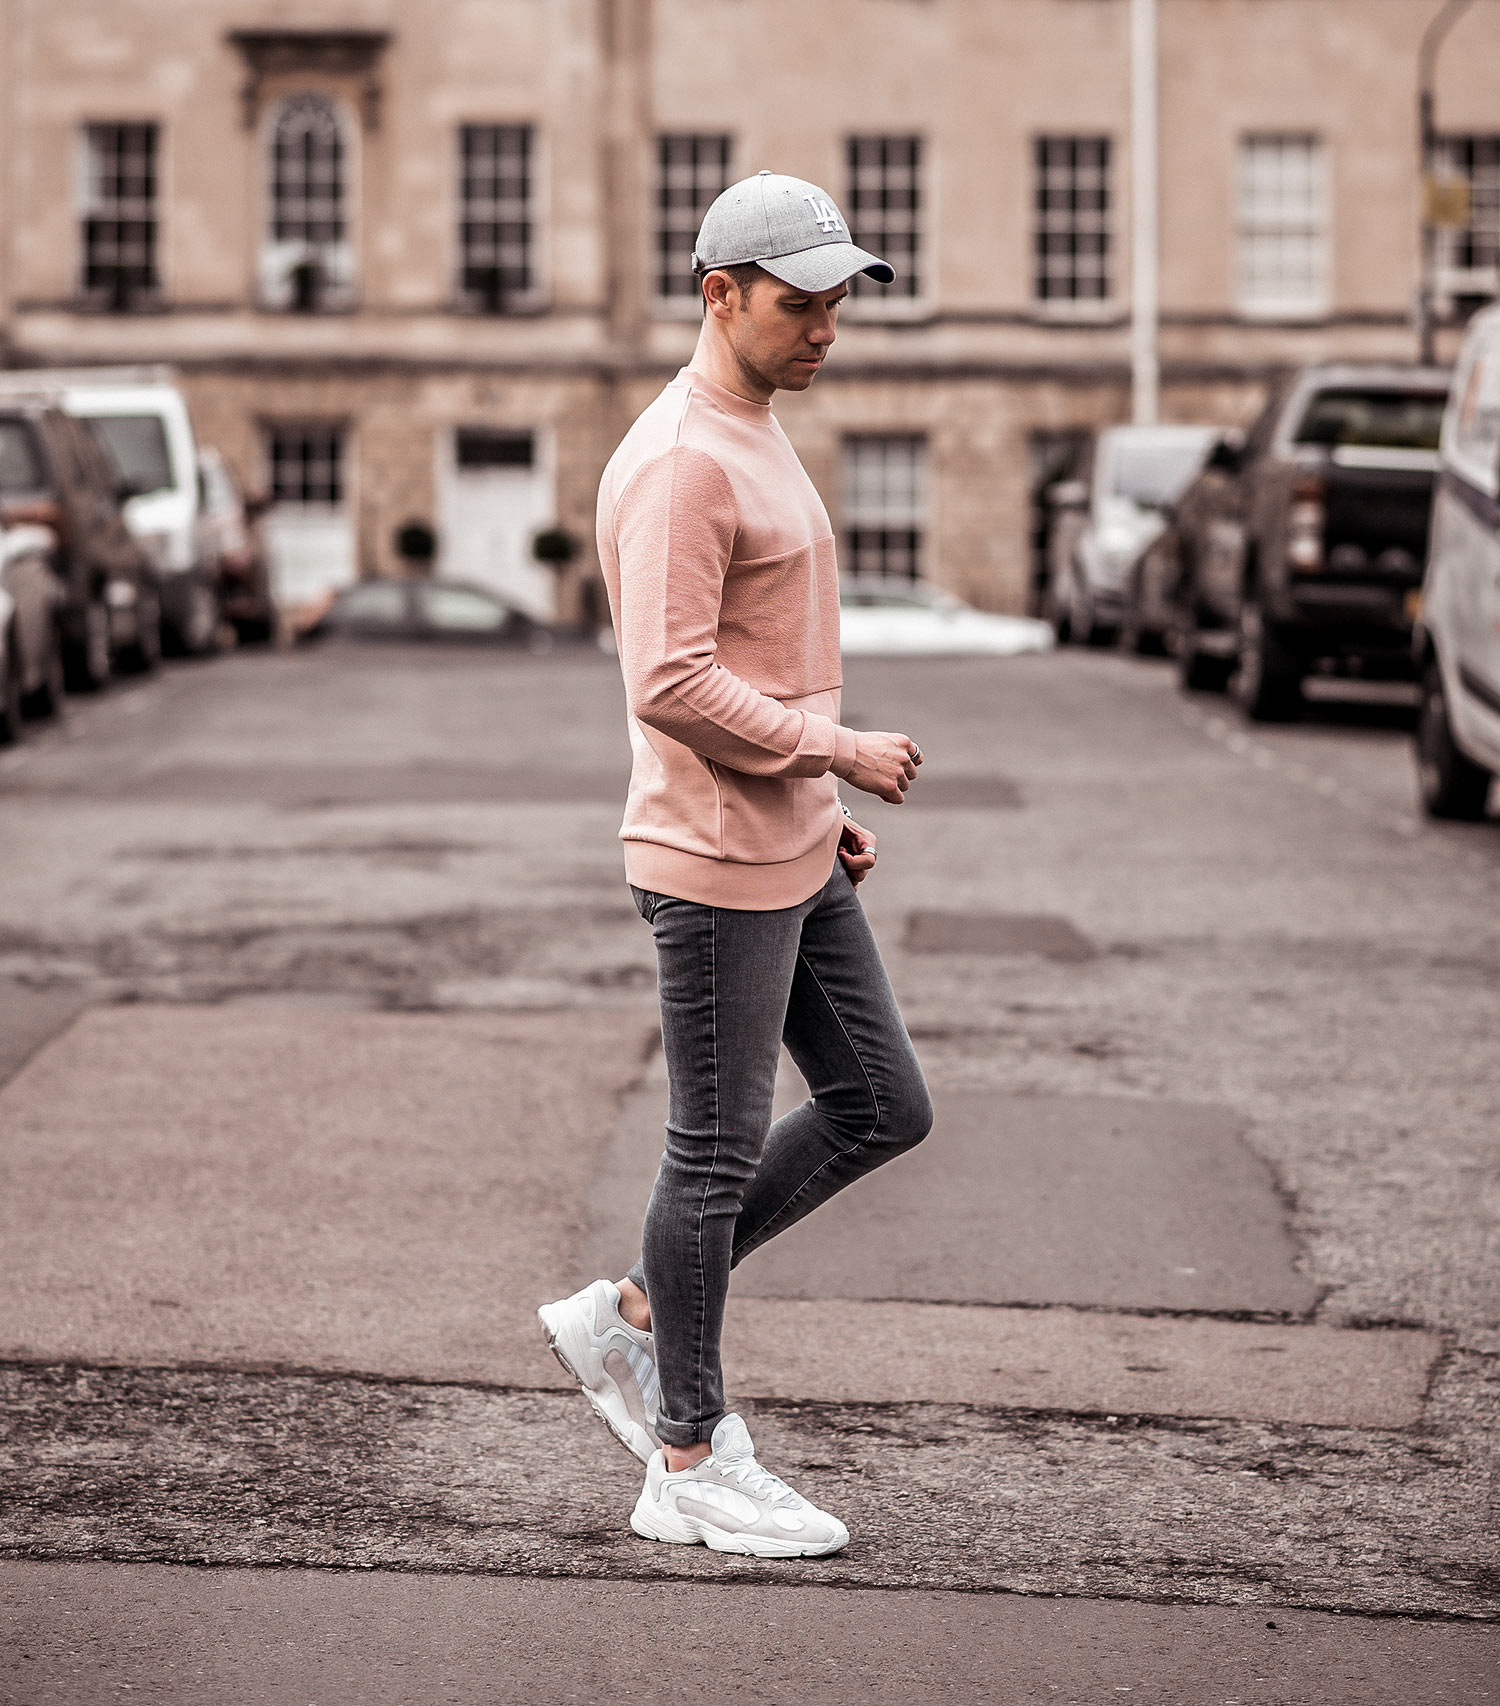 Pink And Grey Street Style Outfit - Your Average Guy